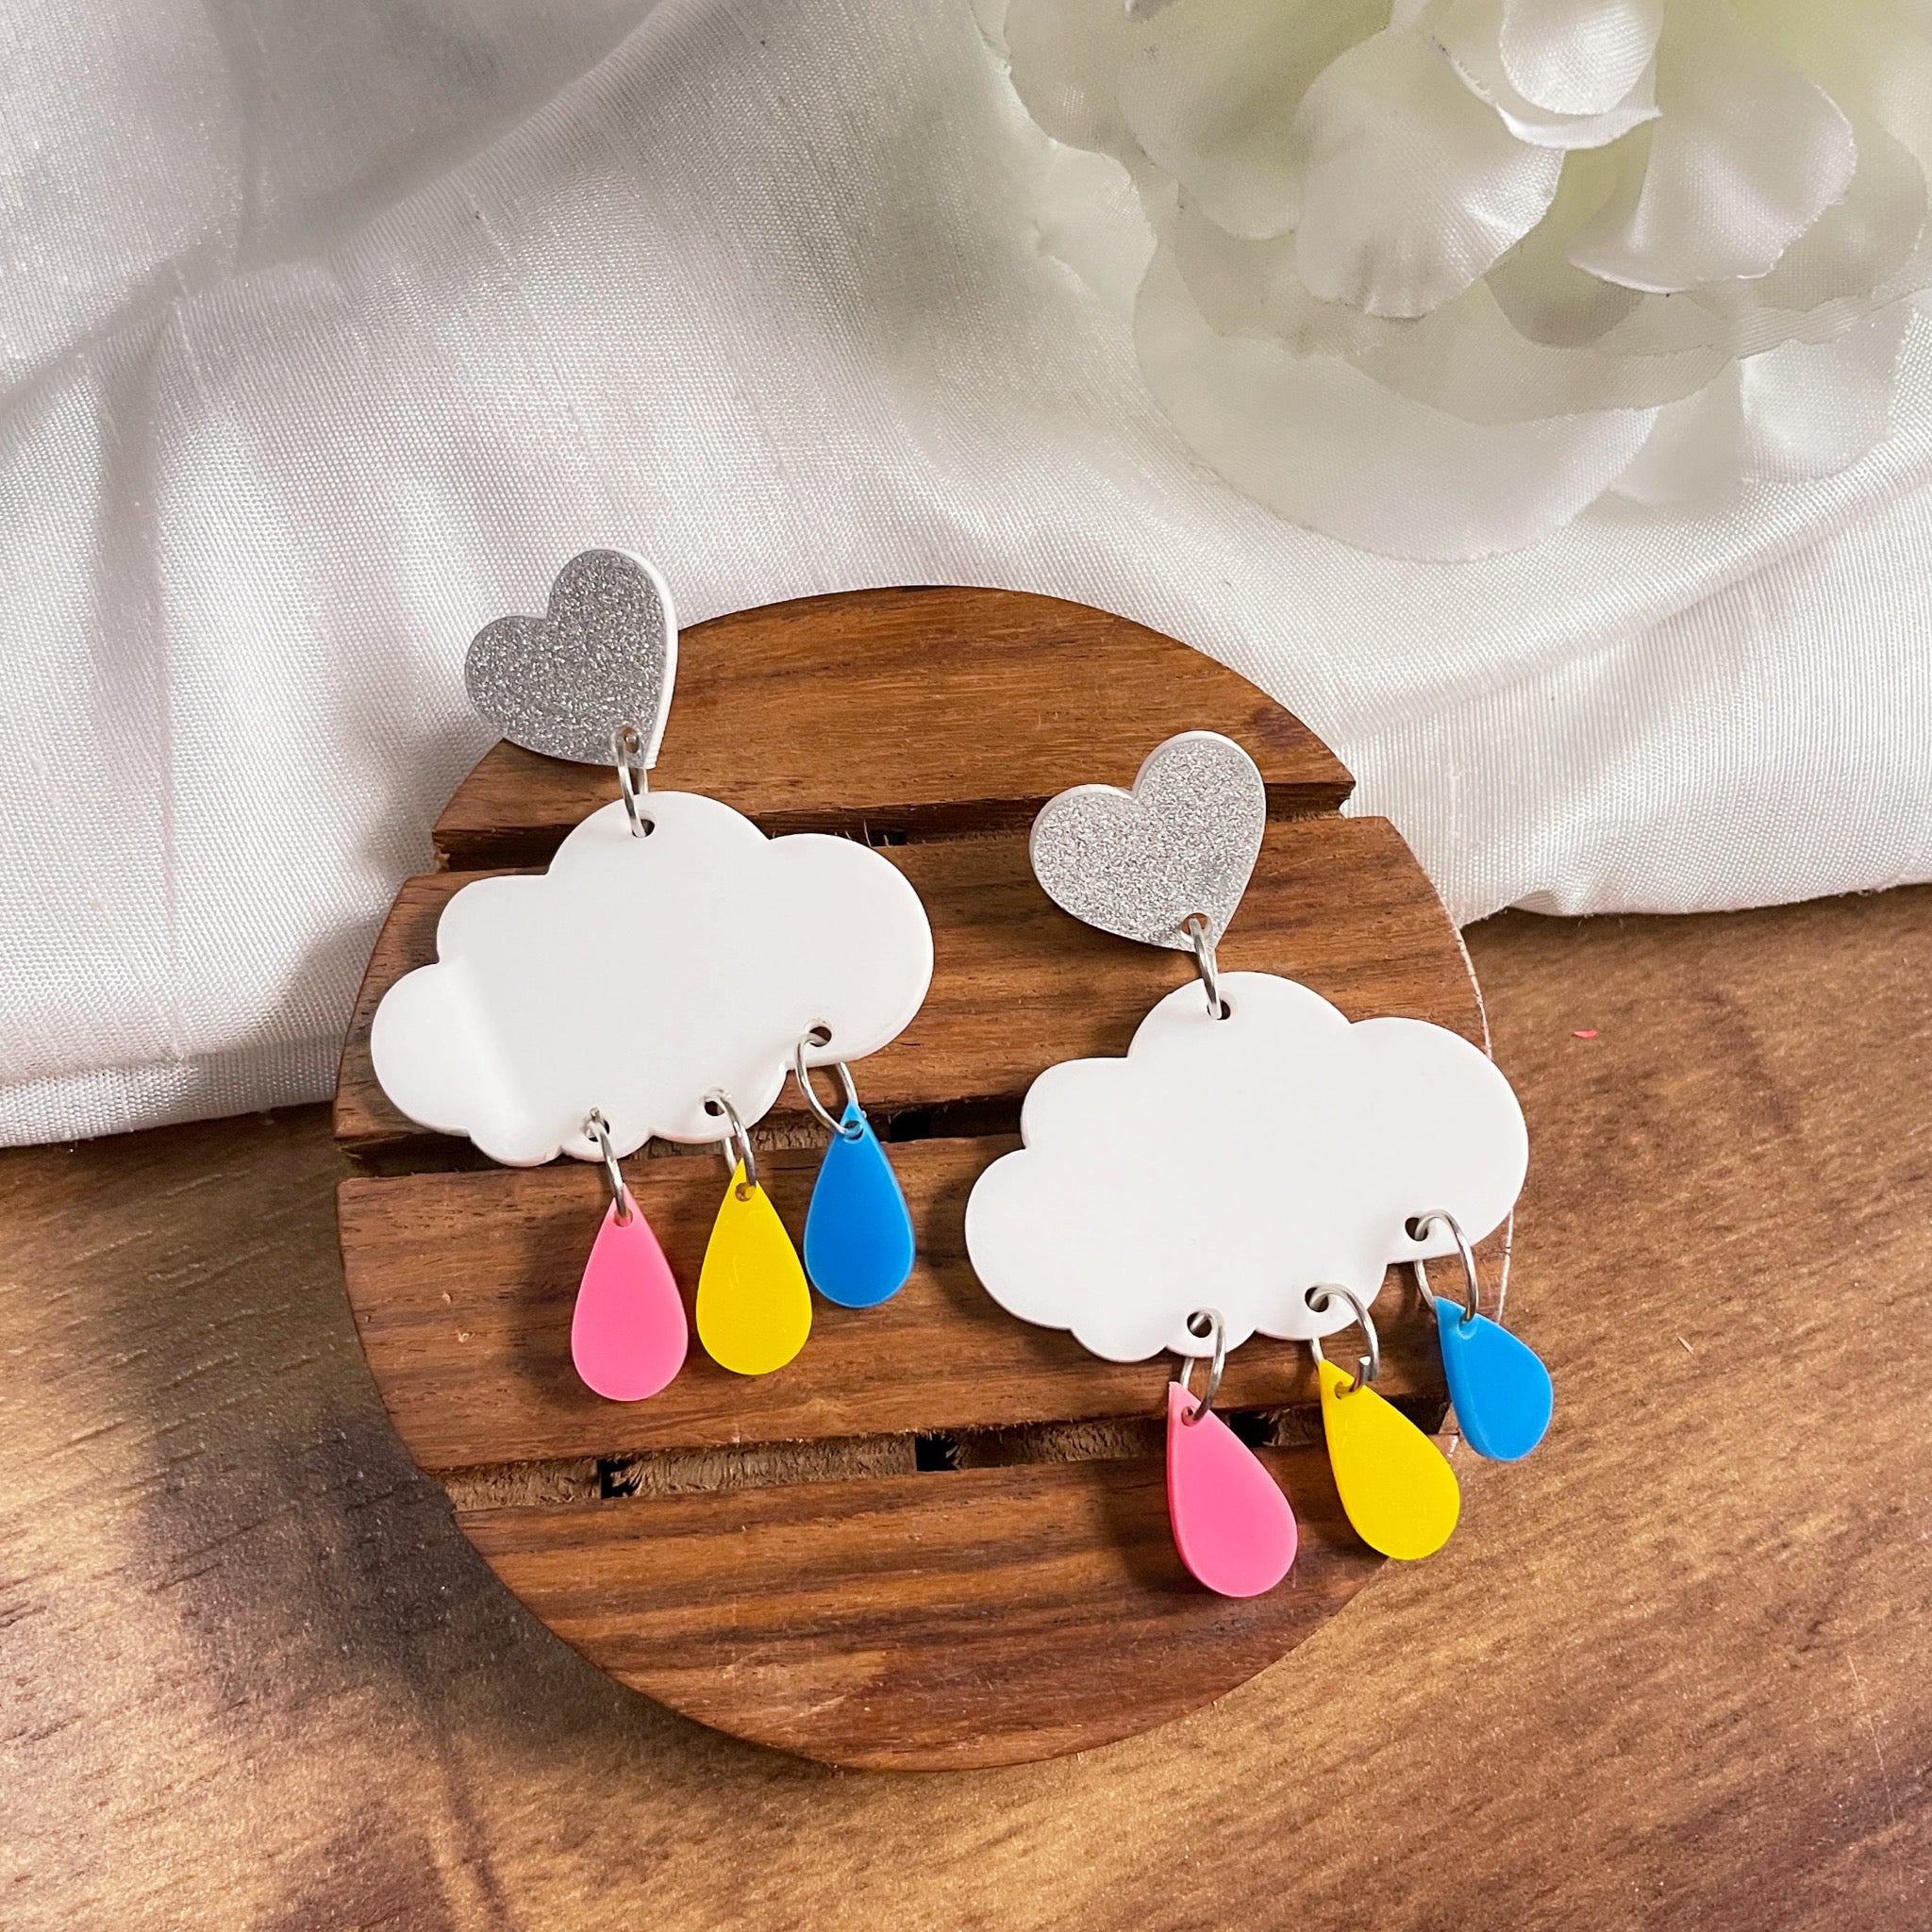 Rainy Cloud Earrings - multi color - Pink, Yellow, and Blue, with white clouds and silver hearts - Nian by Nidhi - in a white and brown background